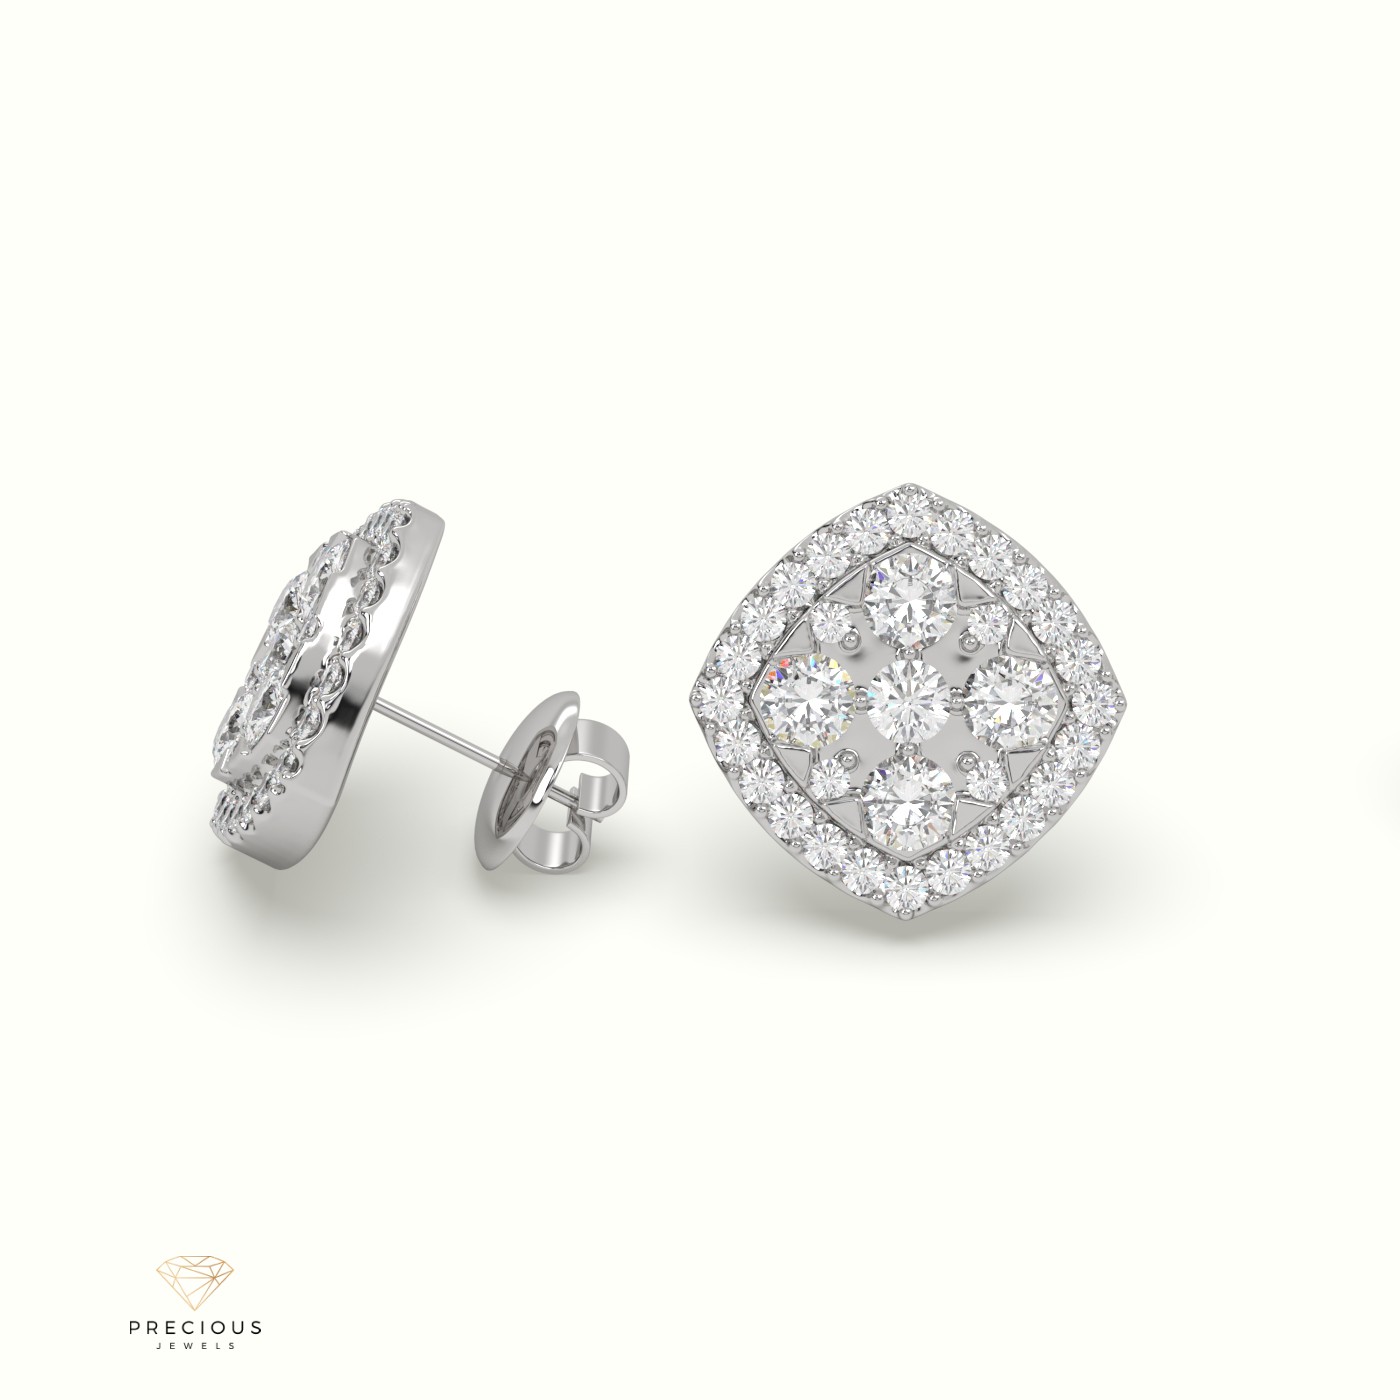 18k white gold rounded square diamond cluster earrings Photos & images